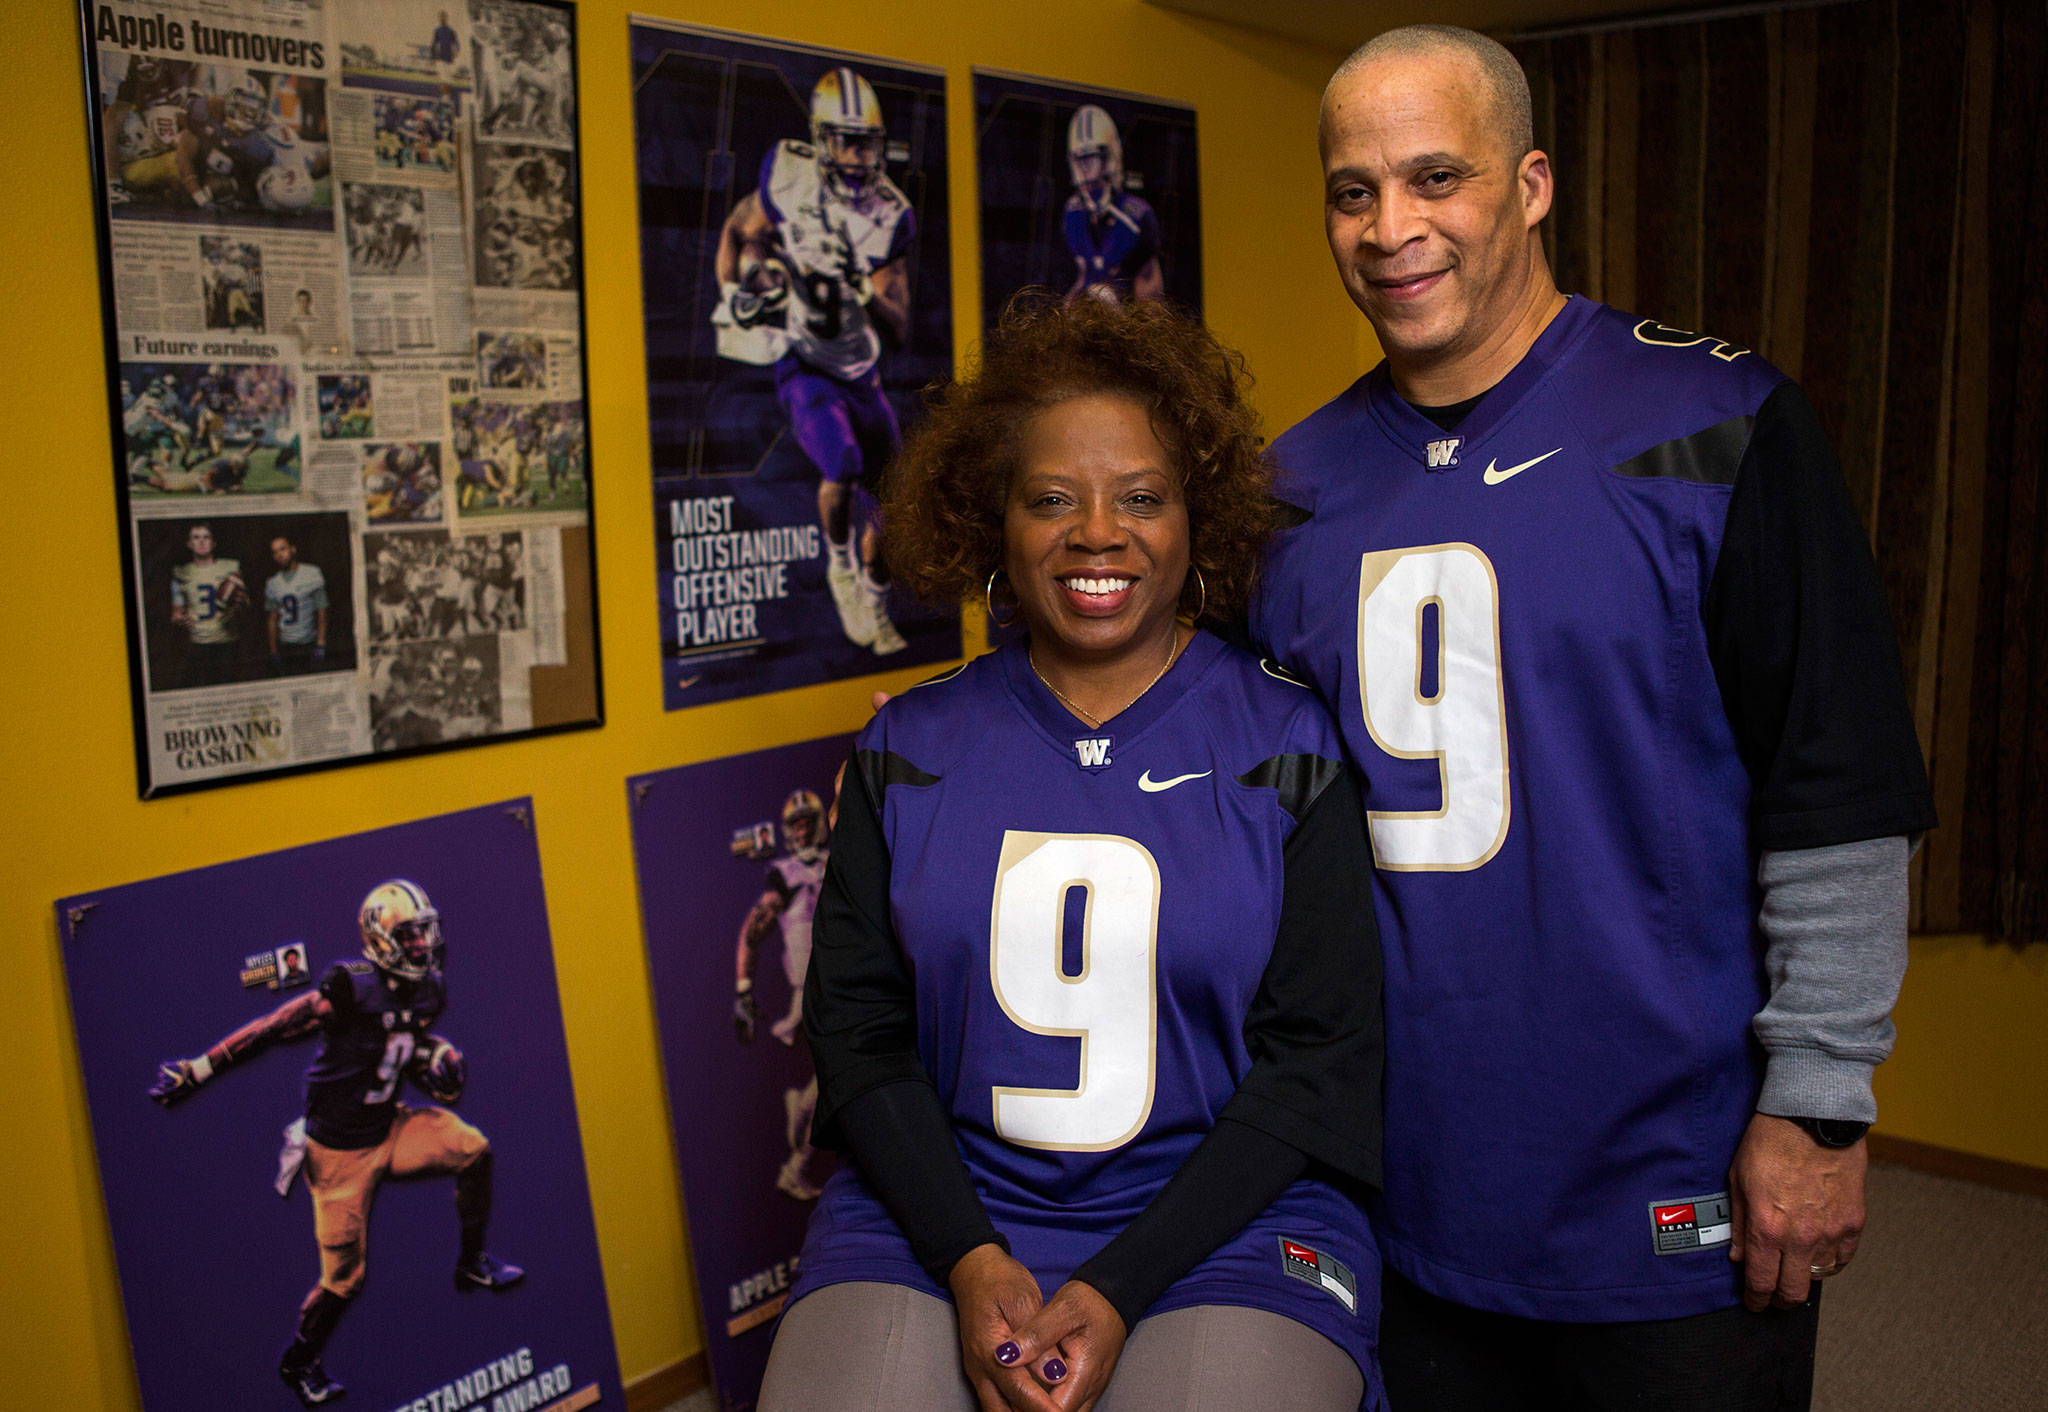 Robbie and Scott Gaskin, parents of University of Washington Husky football running back Myles Gaskin, stand near some memorabilia of his record-setting career at their home in Lynnwood. The family is in Pasadena this week to watch him play in the Rose Bowl. (Olivia Vanni / The Herald)